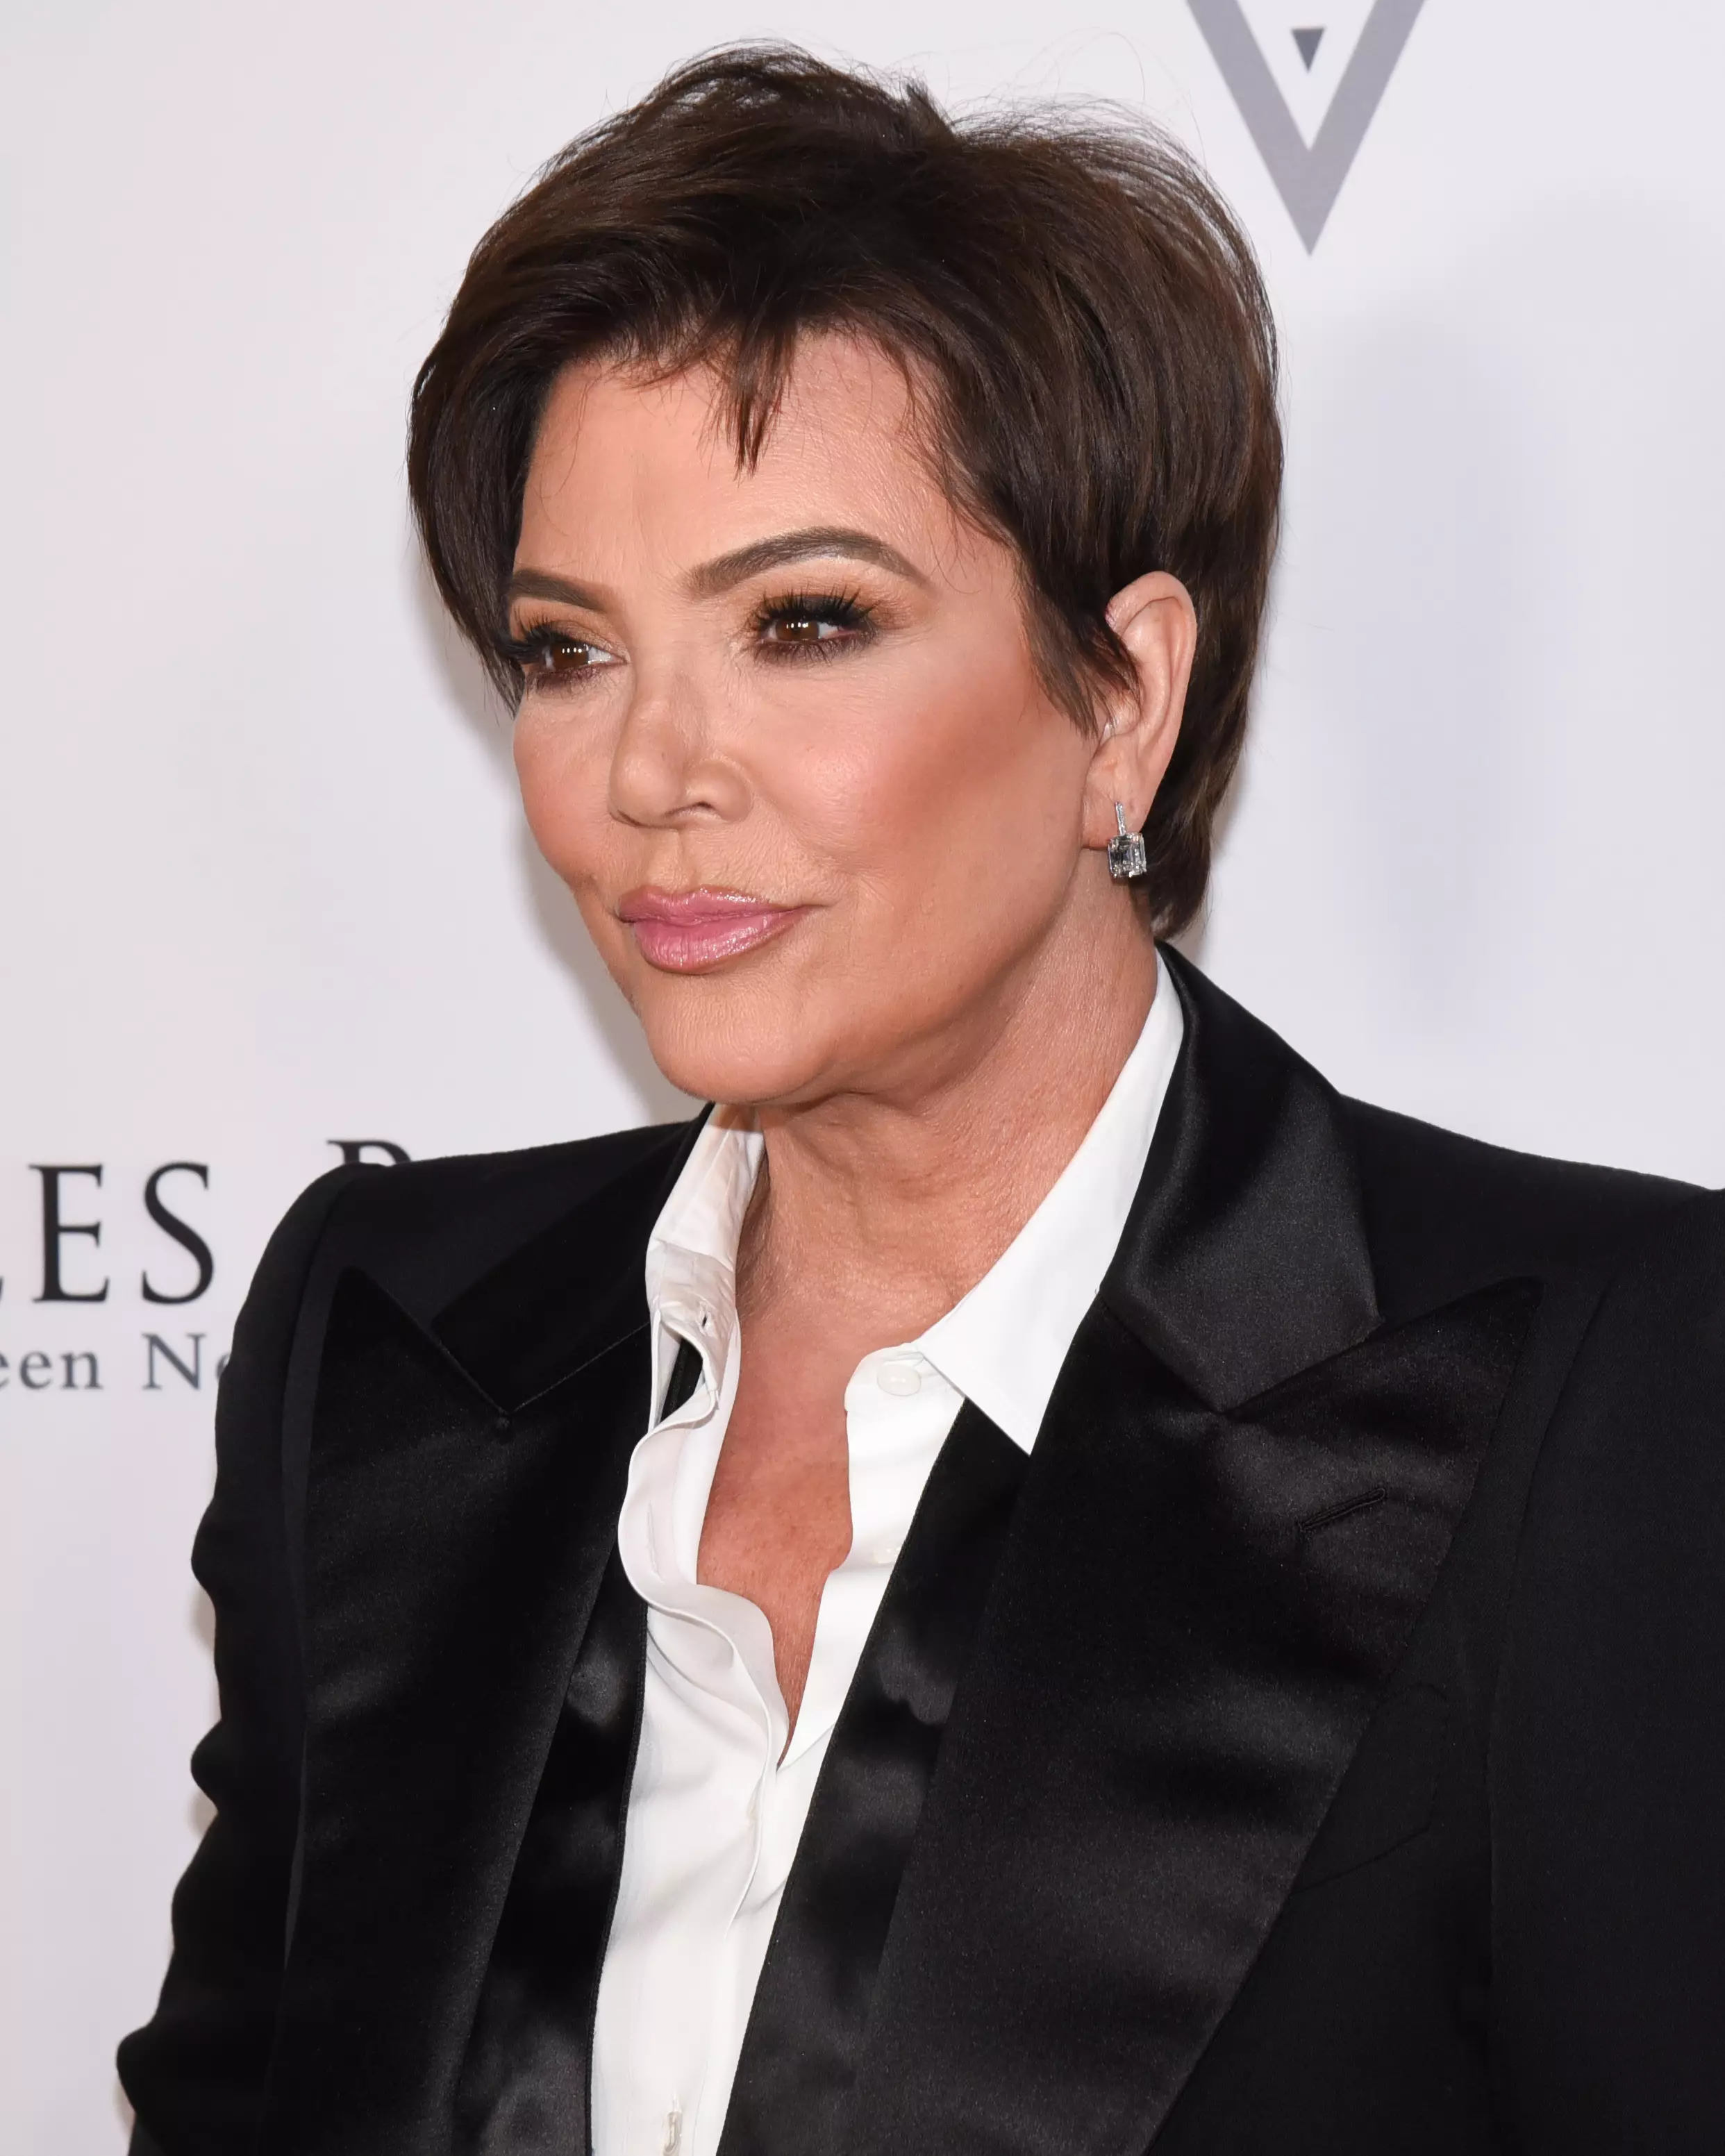 Kris Jenner said the family 'tried so hard' to be safe (